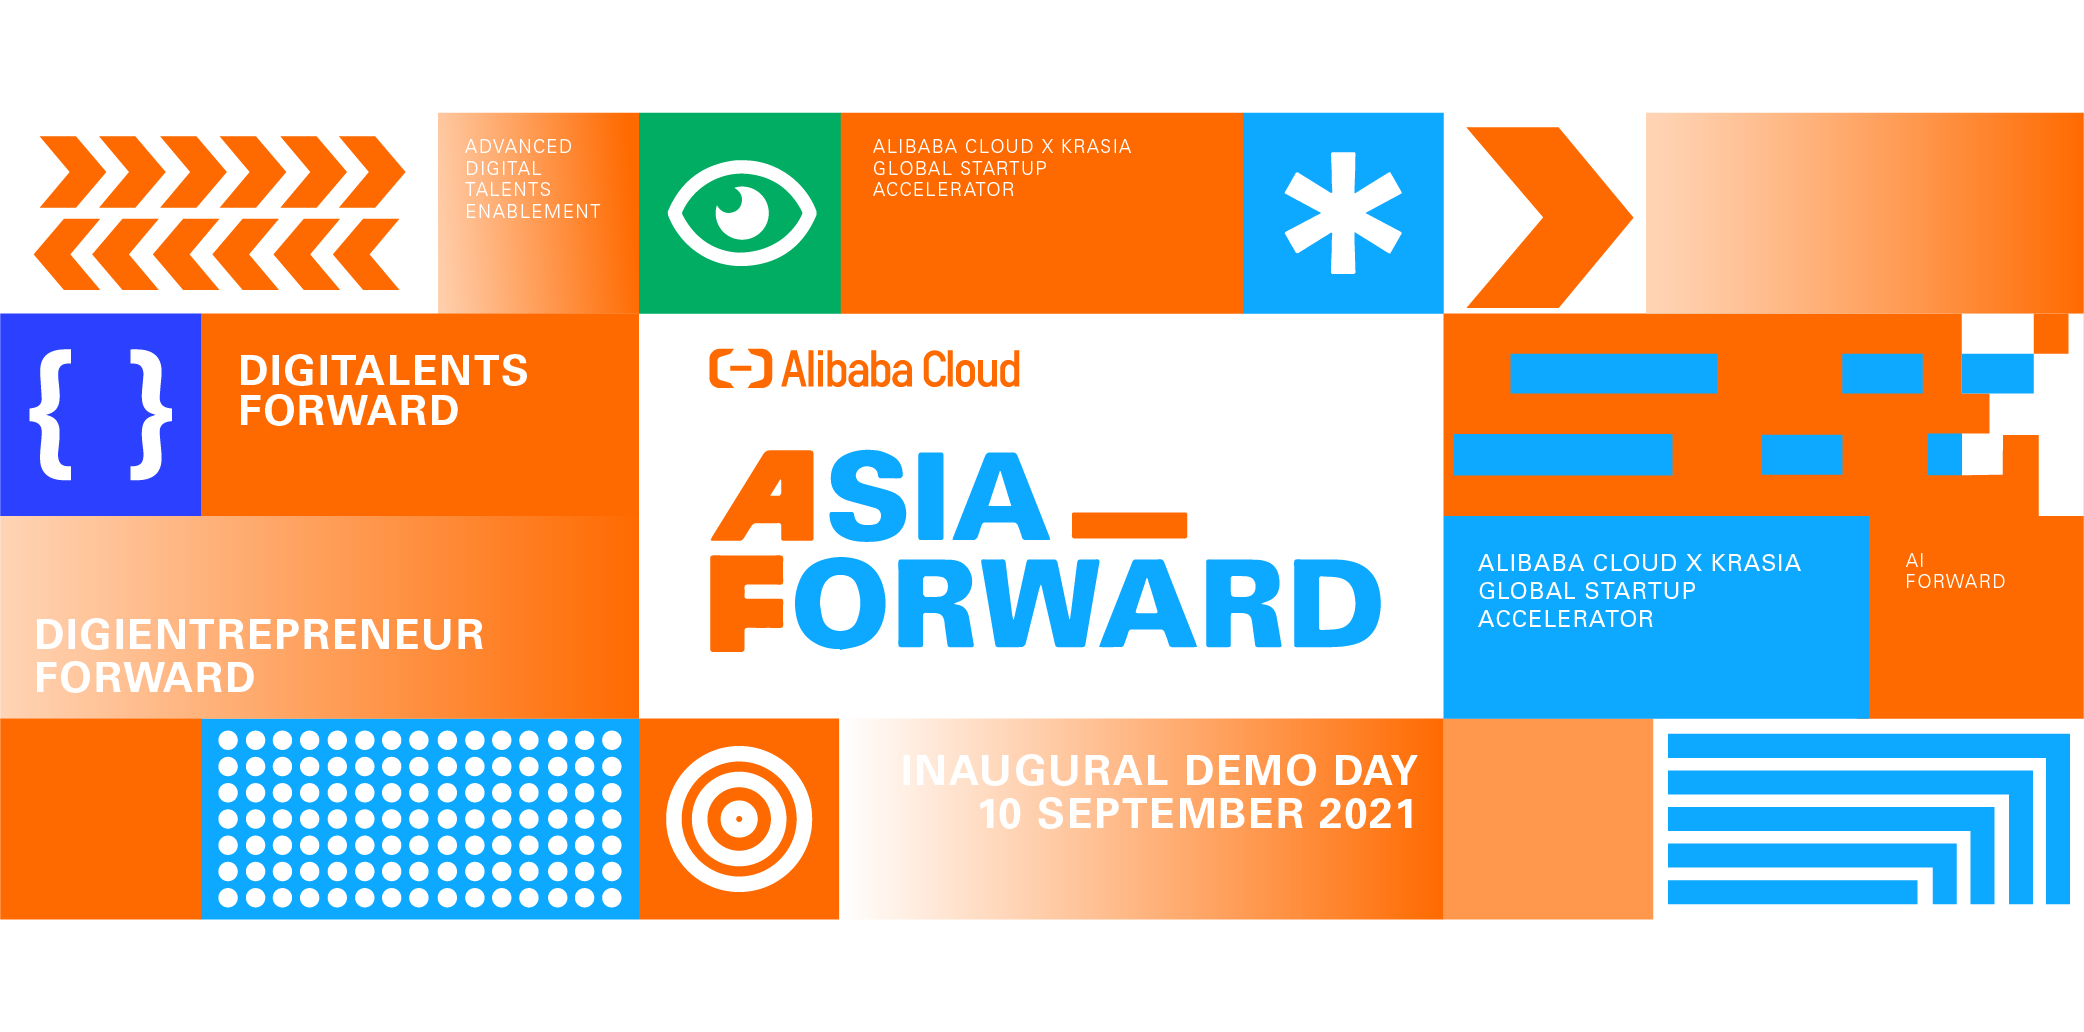  The image shows a poster for the event 'Asia Forward', which is organized by Alibaba Cloud and MediaTek. The event will take place on September 10, 2021.